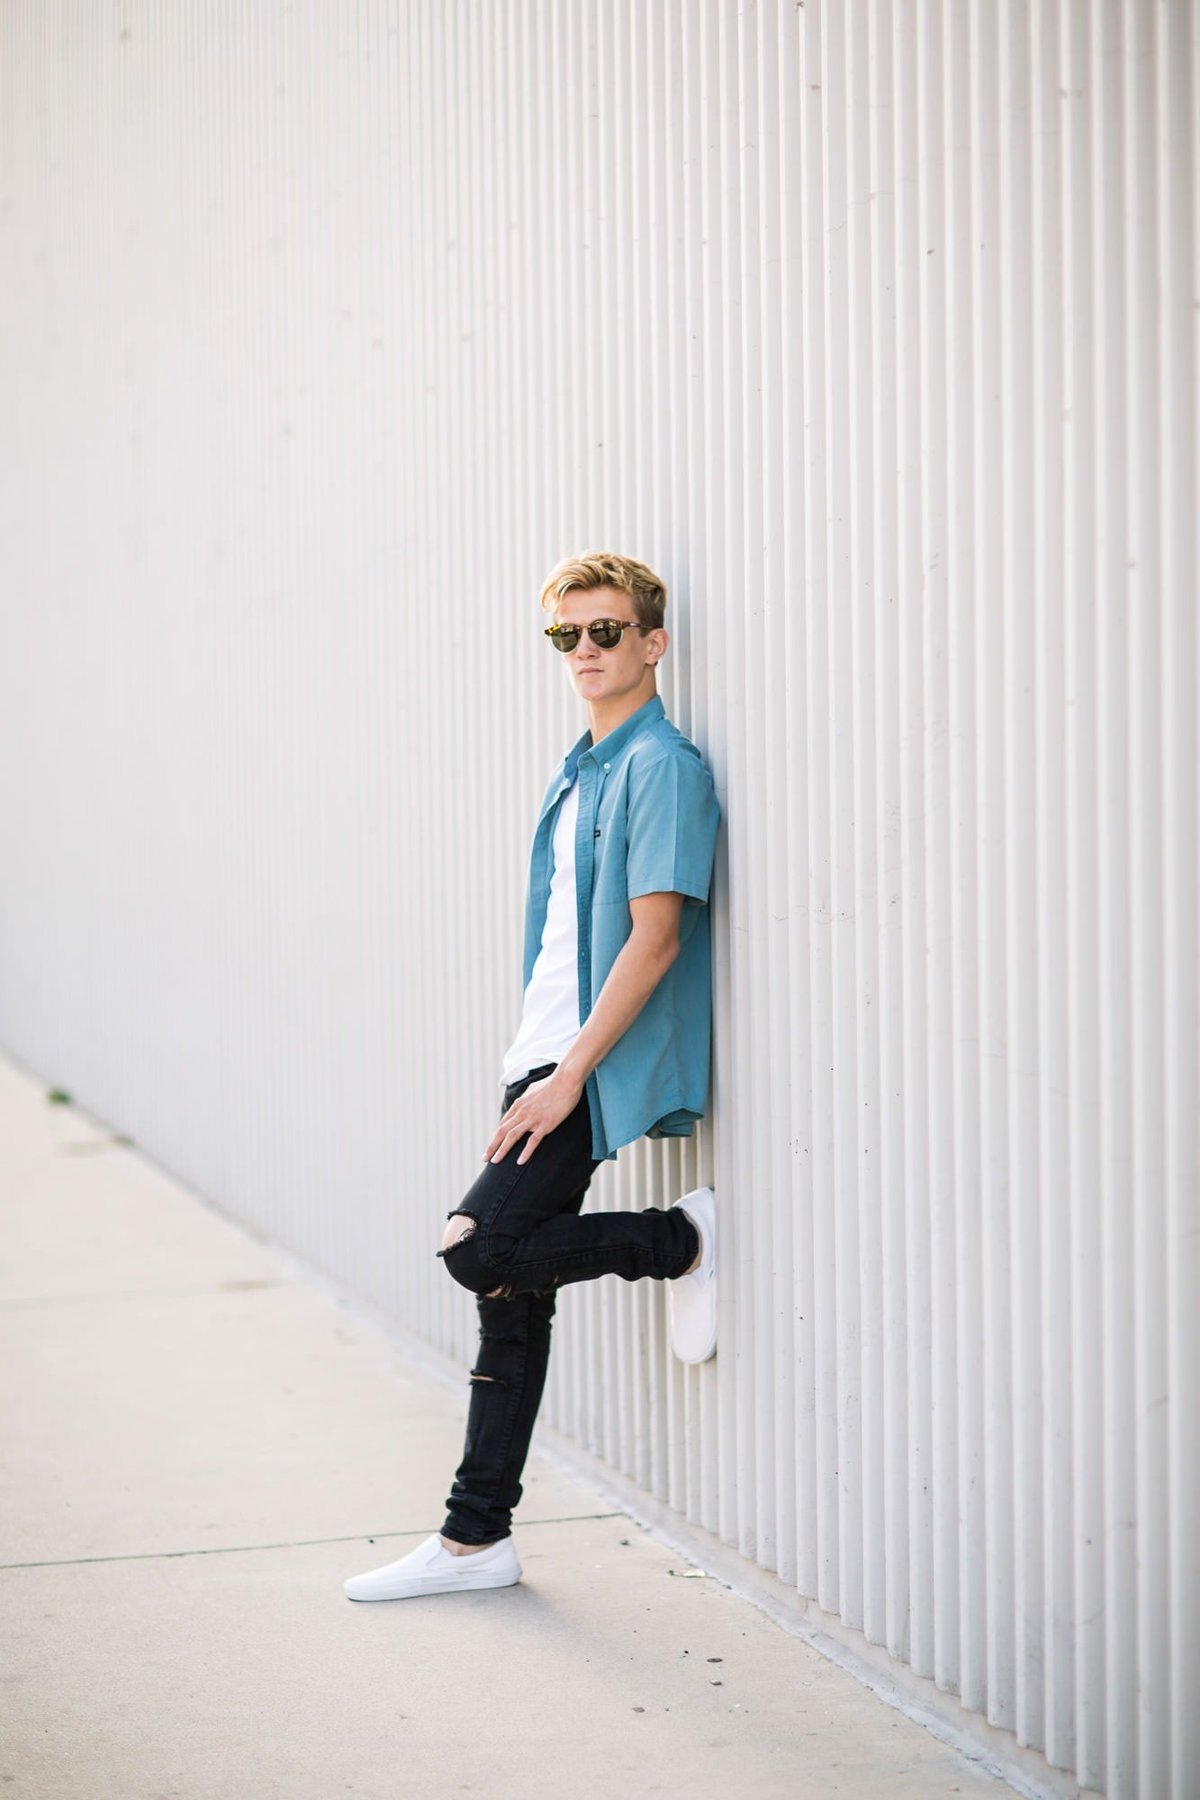 High School senior poses with sunglasses on leaning against a wall for his senior portraits